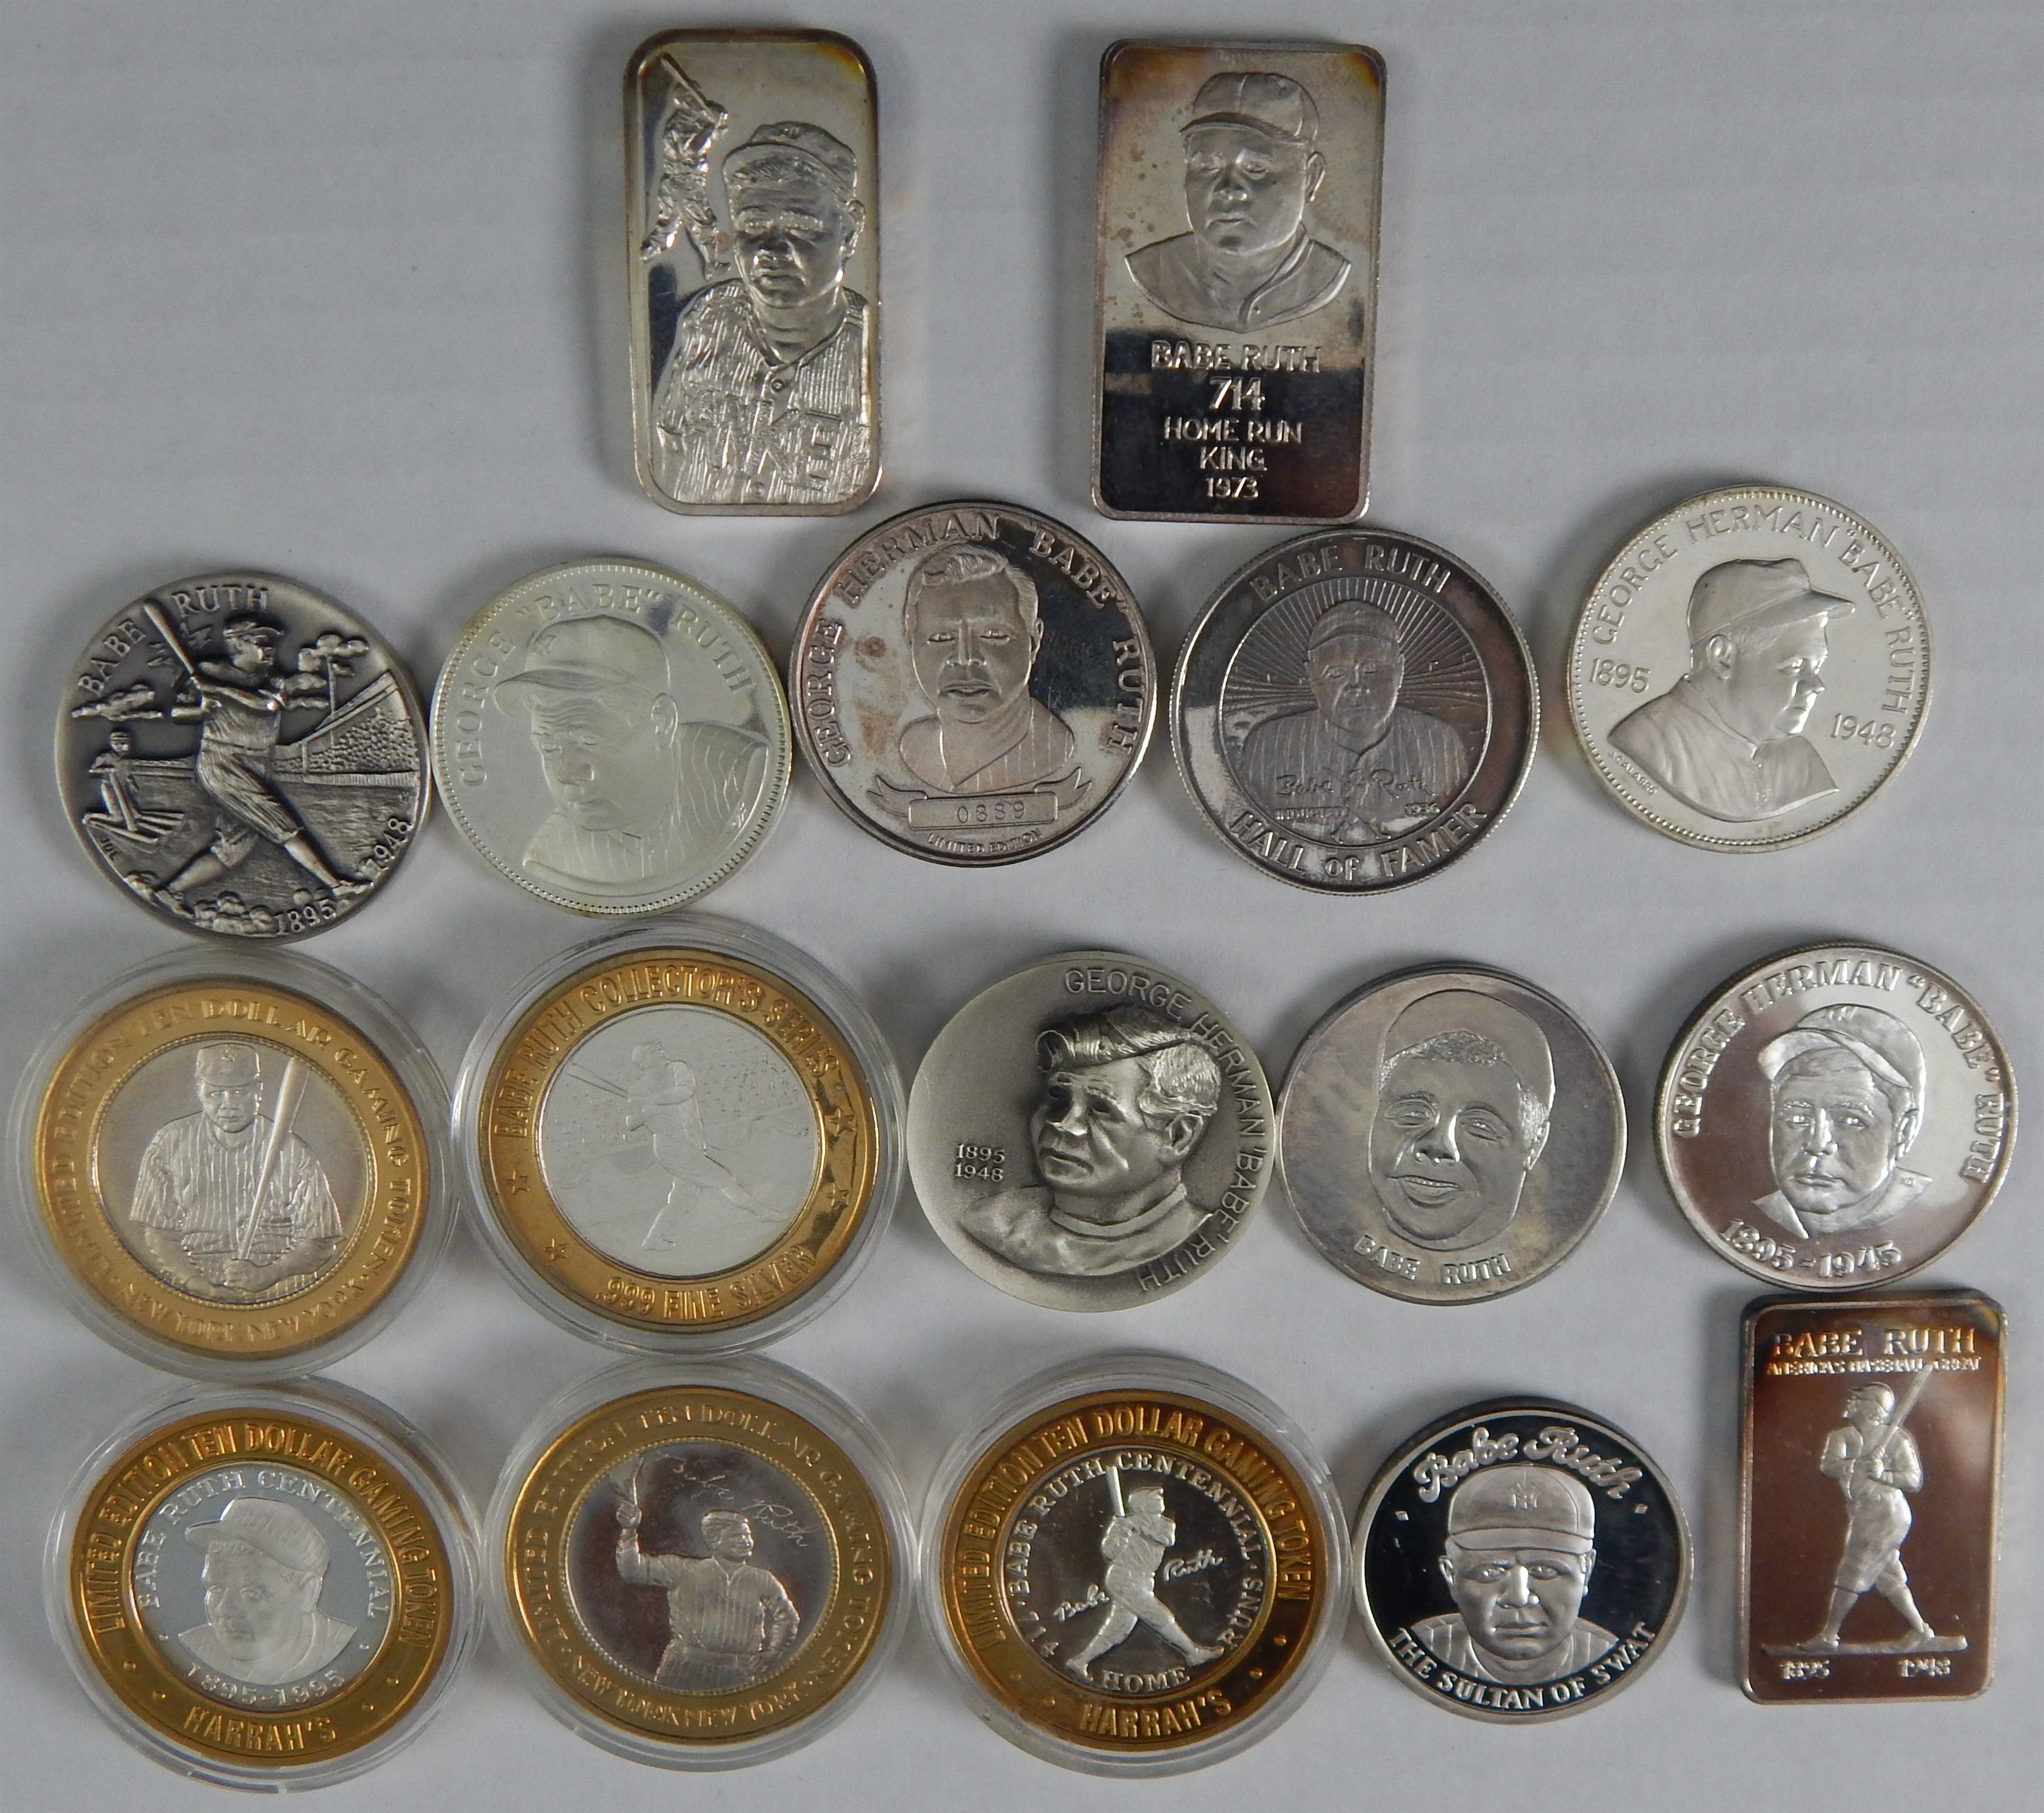 Collection of Babe Ruth One Troy Ounce .999 Silver Coins (17)